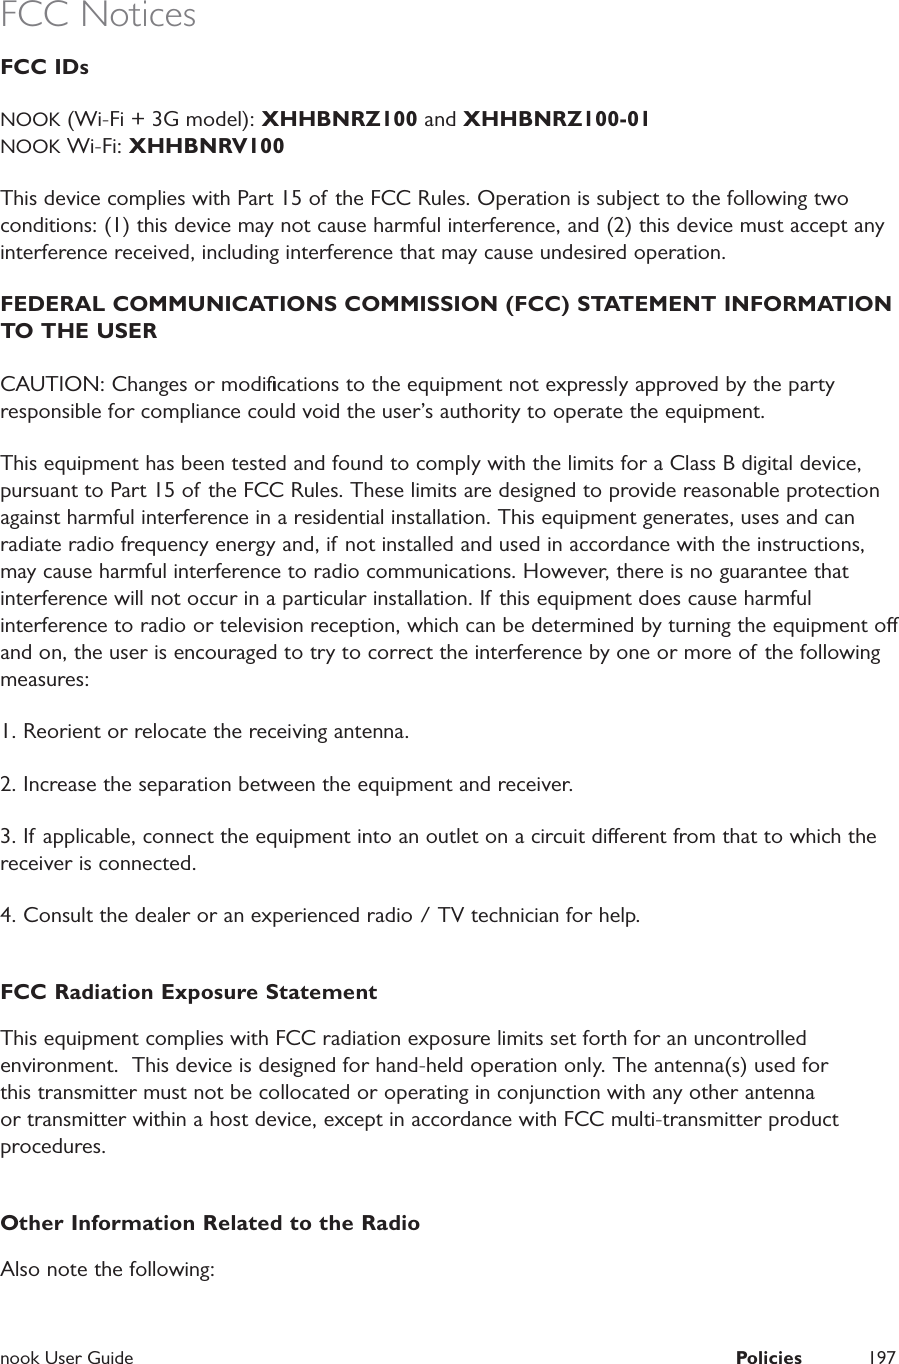  nook User Guide  Policies 197FCC NoticesFCC IDs NOOK (Wi-Fi + 3G model): XHHBNRZ100 and XHHBNRZ100-01NOOK Wi-Fi: XHHBNRV100This device complies with Part 15 of the FCC Rules. Operation is subject to the following two conditions: (1) this device may not cause harmful interference, and (2) this device must accept any interference received, including interference that may cause undesired operation.FEDERAL COMMUNICATIONS COMMISSION (FCC) STATEMENT INFORMATION TO THE USER CAUTION: Changes or modiﬁcations to the equipment not expressly approved by the party responsible for compliance could void the user’s authority to operate the equipment. This equipment has been tested and found to comply with the limits for a Class B digital device, pursuant to Part 15 of the FCC Rules. These limits are designed to provide reasonable protection against harmful interference in a residential installation. This equipment generates, uses and can radiate radio frequency energy and, if not installed and used in accordance with the instructions, may cause harmful interference to radio communications. However, there is no guarantee that interference will not occur in a particular installation. If this equipment does cause harmful interference to radio or television reception, which can be determined by turning the equipment o and on, the user is encouraged to try to correct the interference by one or more of the following measures: 1. Reorient or relocate the receiving antenna. 2. Increase the separation between the equipment and receiver. 3. If applicable, connect the equipment into an outlet on a circuit dierent from that to which the receiver is connected.4. Consult the dealer or an experienced radio / TV technician for help. FCC Radiation Exposure StatementThis equipment complies with FCC radiation exposure limits set forth for an uncontrolled environment.  This device is designed for hand-held operation only. The antenna(s) used for this transmitter must not be collocated or operating in conjunction with any other antenna or transmitter within a host device, except in accordance with FCC multi-transmitter product procedures.Other Information Related to the RadioAlso note the following: